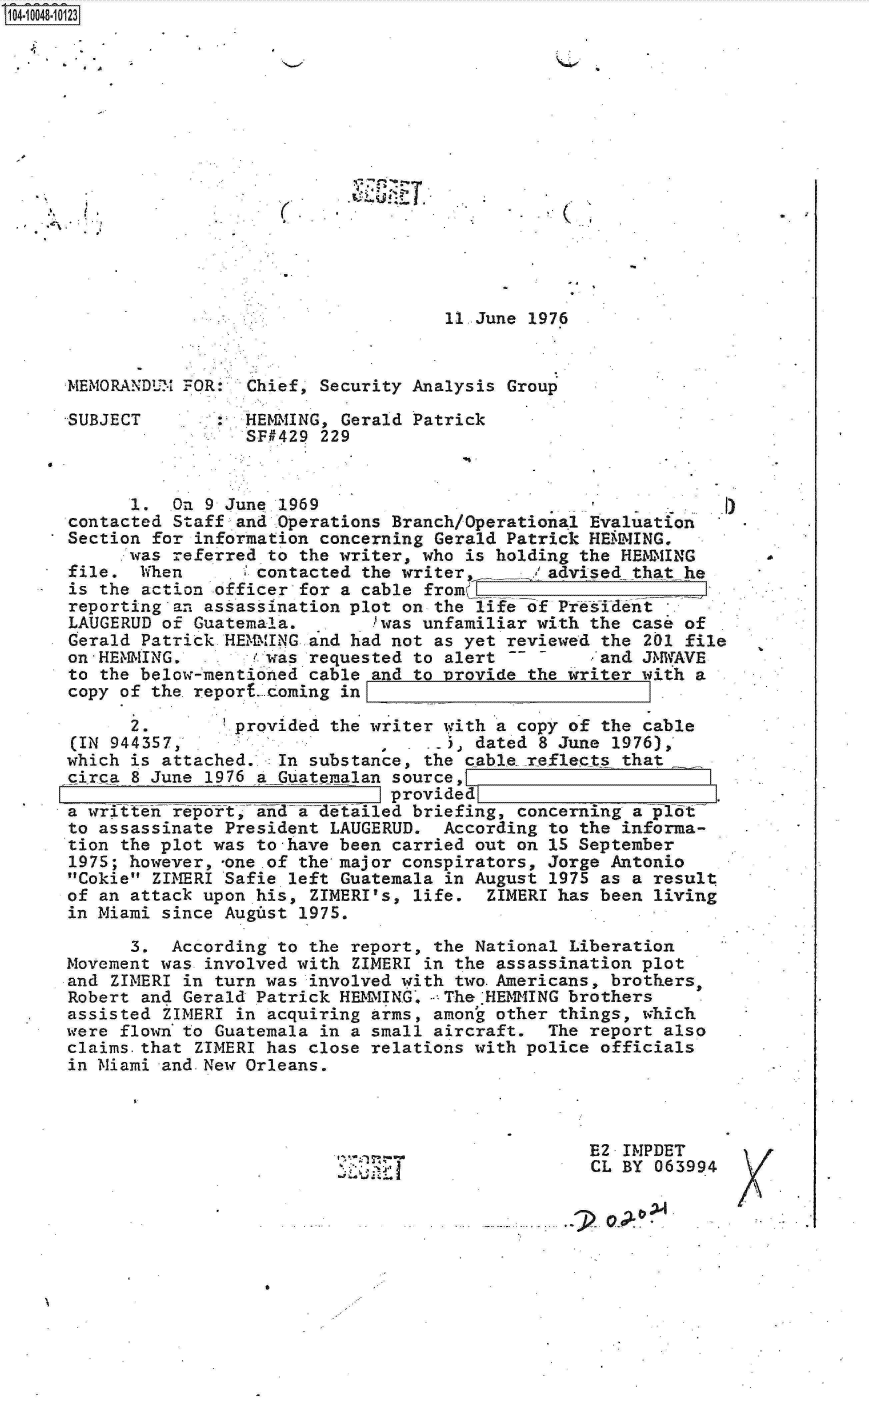 handle is hein.jfk/jfkarch07716 and id is 1 raw text is: 















                                    11 June 1976


MEMORANDUM FOR:  Chief, Security Analysis Group

SUBJECT          HEM2lING, Gerald Patrick
                 SF429  229


      1.  On 9 June 1969                                   .   )
contacted Staff and Operations Branch/Operational Evaluation
Section for information concerning Gerald Patrick HEMMING.
      was referred to the writer, who is holding the HEMMING
file.  When     . 1contacted the writer     Iadvised  that he
is the action officer for a cable from   _
reporting an assassination plot on the life of President
LAUGERUD of Guatemala.   .    was unfamiliar with the case of
Gerald Patrick-HEMMING and had not as yet reviewed the 201 file
on - HENNING.     / was requested to alert        . and JMWAVE
to the below-mentioned cable and to provide the writer with a
copy of the report. coming in

      2.        provided the writer with a copy of the cable
(IN 944357,                         .  dated 8 June 1976),
which is attached.  In substance, the cable reflects that
circa 8 June 1976 a Guatemalan source,
                               provided
a written report, ad    detailed briefing, concerning aplot
to assassinate President LAUGERUD.  According to the informa-
tion the plot was to-have been carried out on 15 September
1975; however, -one .of the major conspirators, Jorge Antonio
Cokie ZIMERI Safie left Guatemala in August 1975 as a result
of an attack upon his, ZIMERI's, life.  ZIMERI has been living
in Miami since Augist 1975.

      3.  According to the report, the National Liberation
Movement was involved with ZIMERI in the assassination plot
and ZIMERI in turn was involved with two.Americans, brothers,
Robert and Gerald Patrick HEMMING, - The'HEMMING brothers
assisted ZIMERI in acquiring arms, amon'g other things, which
were flown to Guatemala in a small aircraft.  The report also
claims.that ZIMERI has close relations with police officials
in Miami and.New Orleans.



                                                  E2 IMPDET
                                                  CL BY 063994

                                                       0,x


